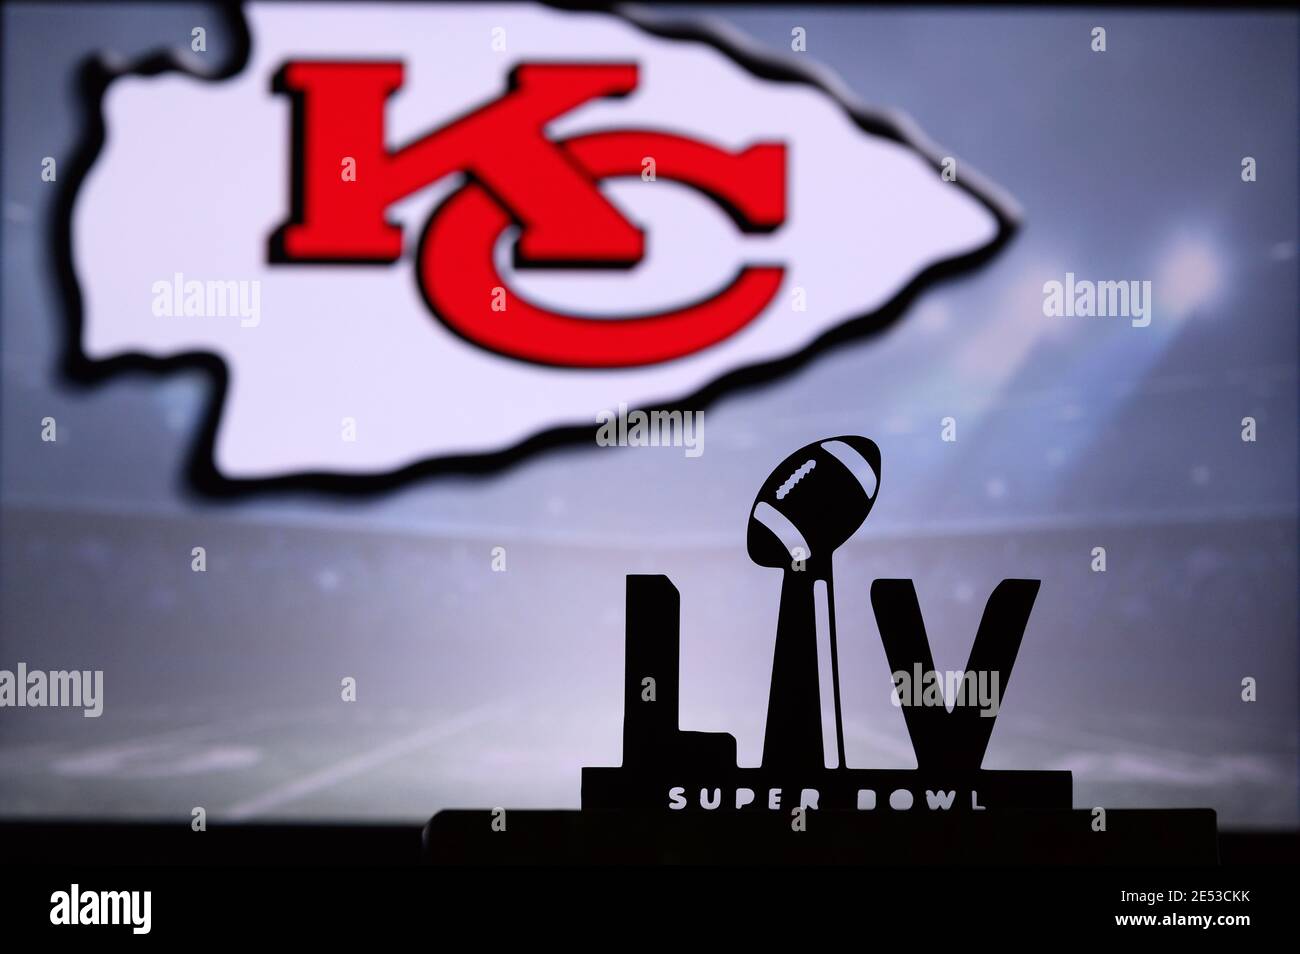 TAMPA BAY, USA, JANUARY, 25. 2021: Super Bowl LIV, the 55th Super Bowl 2020, Kansas City Chiefs logo on screen in background, NFL final Stock Photo